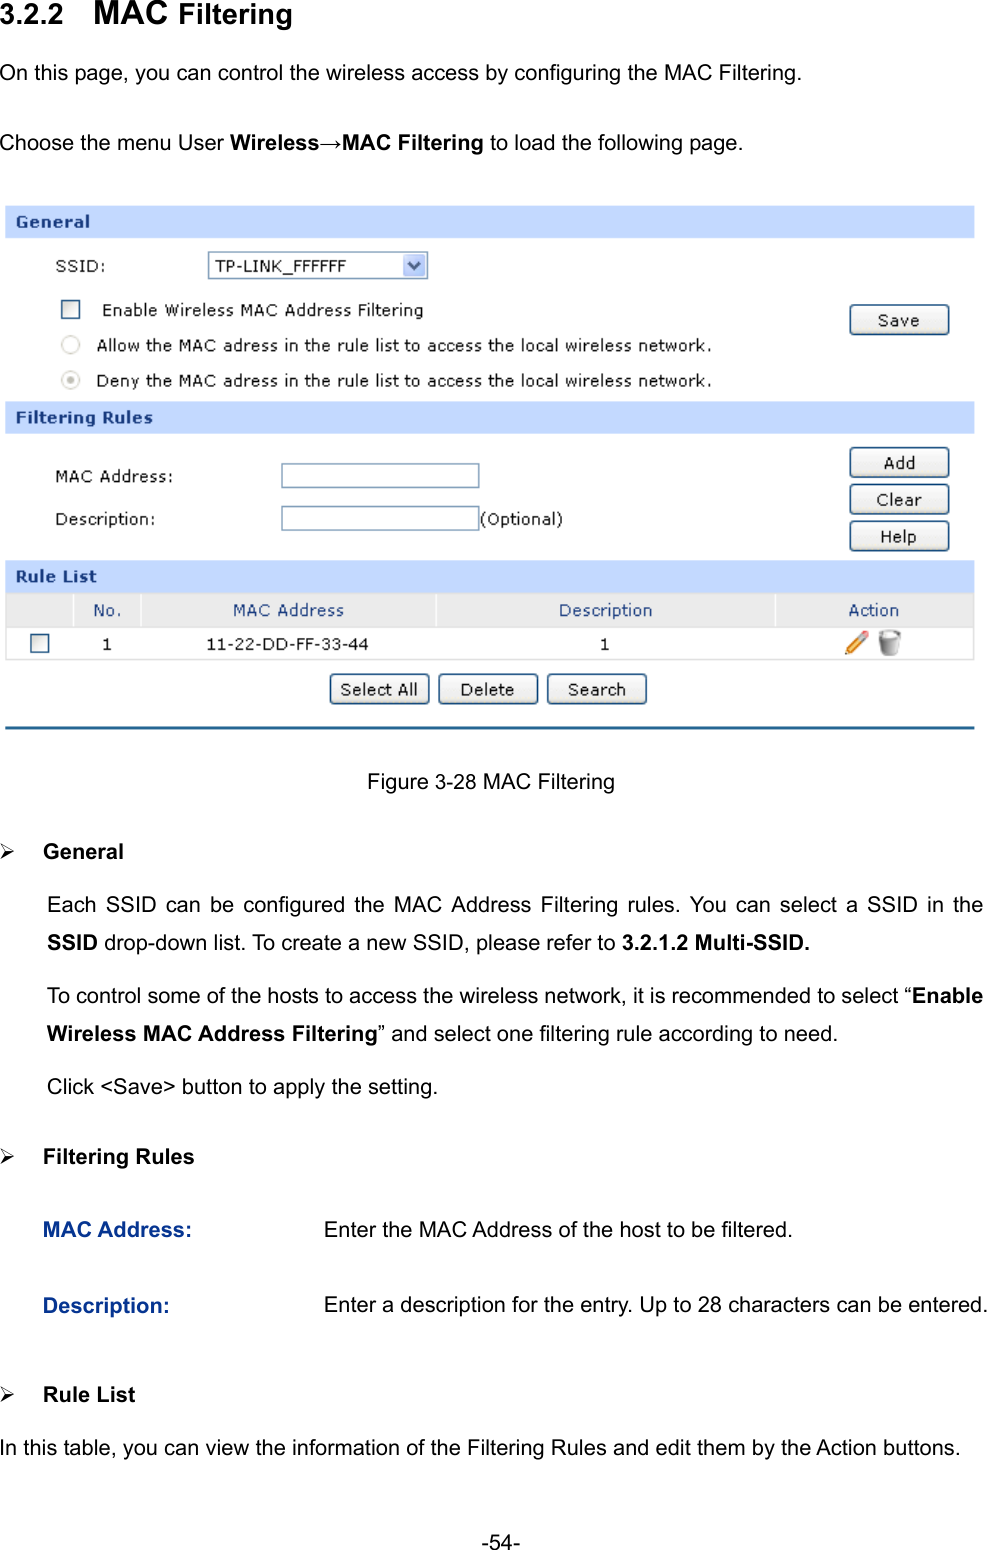  -54- 3.2.2  MAC Filtering On this page, you can control the wireless access by configuring the MAC Filtering. Choose the menu User Wireless→MAC Filtering to load the following page.  Figure 3-28 MAC Filtering ¾ General Each SSID can be configured the MAC Address Filtering rules. You can select a SSID in the SSID drop-down list. To create a new SSID, please refer to 3.2.1.2 Multi-SSID. To control some of the hosts to access the wireless network, it is recommended to select “Enable Wireless MAC Address Filtering” and select one filtering rule according to need. Click &lt;Save&gt; button to apply the setting. ¾ Filtering Rules MAC Address:  Enter the MAC Address of the host to be filtered. Description:  Enter a description for the entry. Up to 28 characters can be entered. ¾ Rule List In this table, you can view the information of the Filtering Rules and edit them by the Action buttons. 